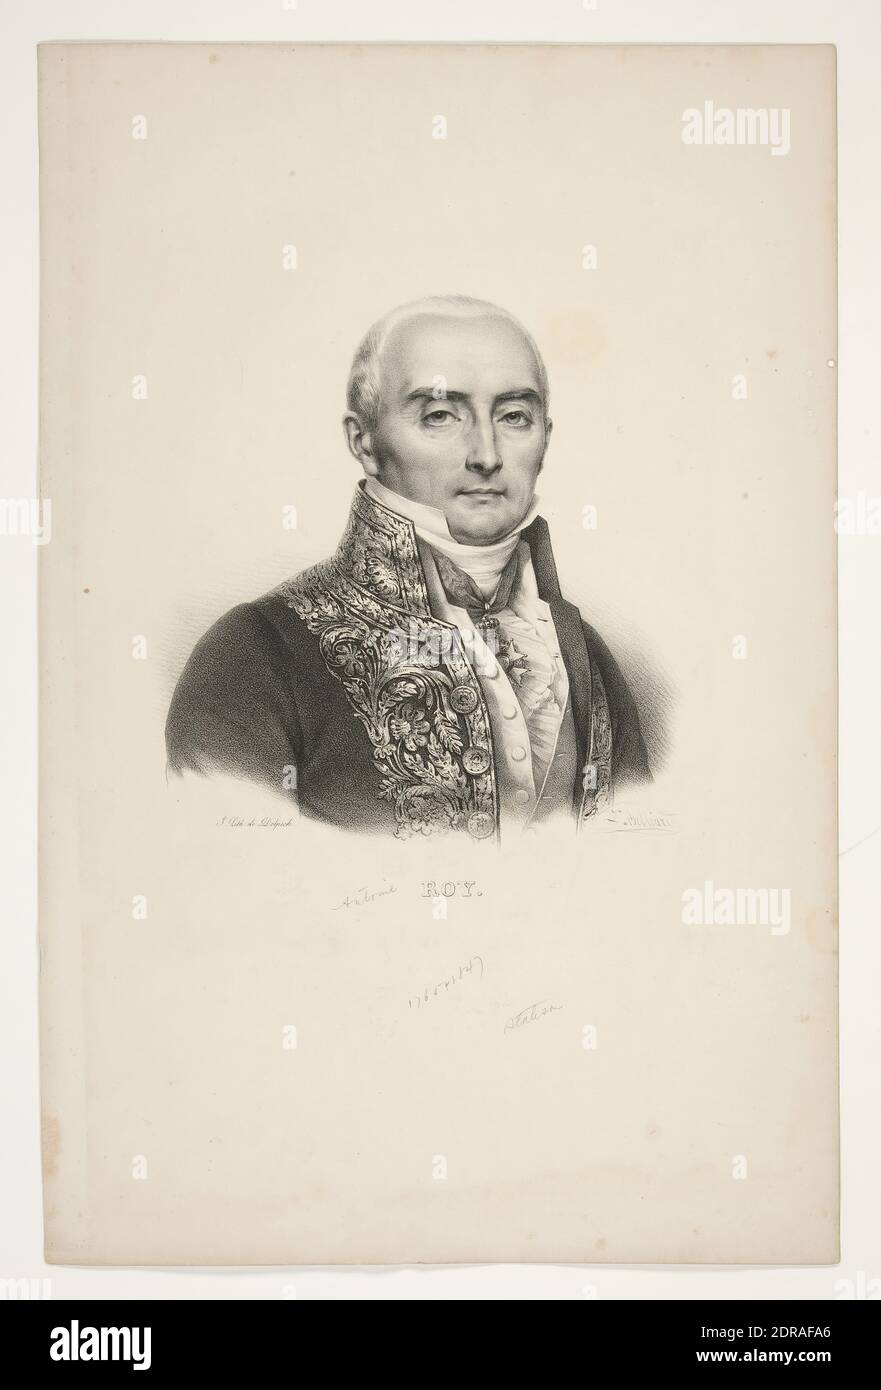 Artist: François-Séraphin Delpech, French, 1778–1825, After: Zéphirin Félix Jean Marius Belliard, French, 1798–1843, Portrait of Antoine Roy, late 18th–early 19th century, Lithograph, Sheet: 48.2 × 31.6 cm (19 × 12 7/16in.), French, 19th century, Works on Paper - Prints Stock Photo